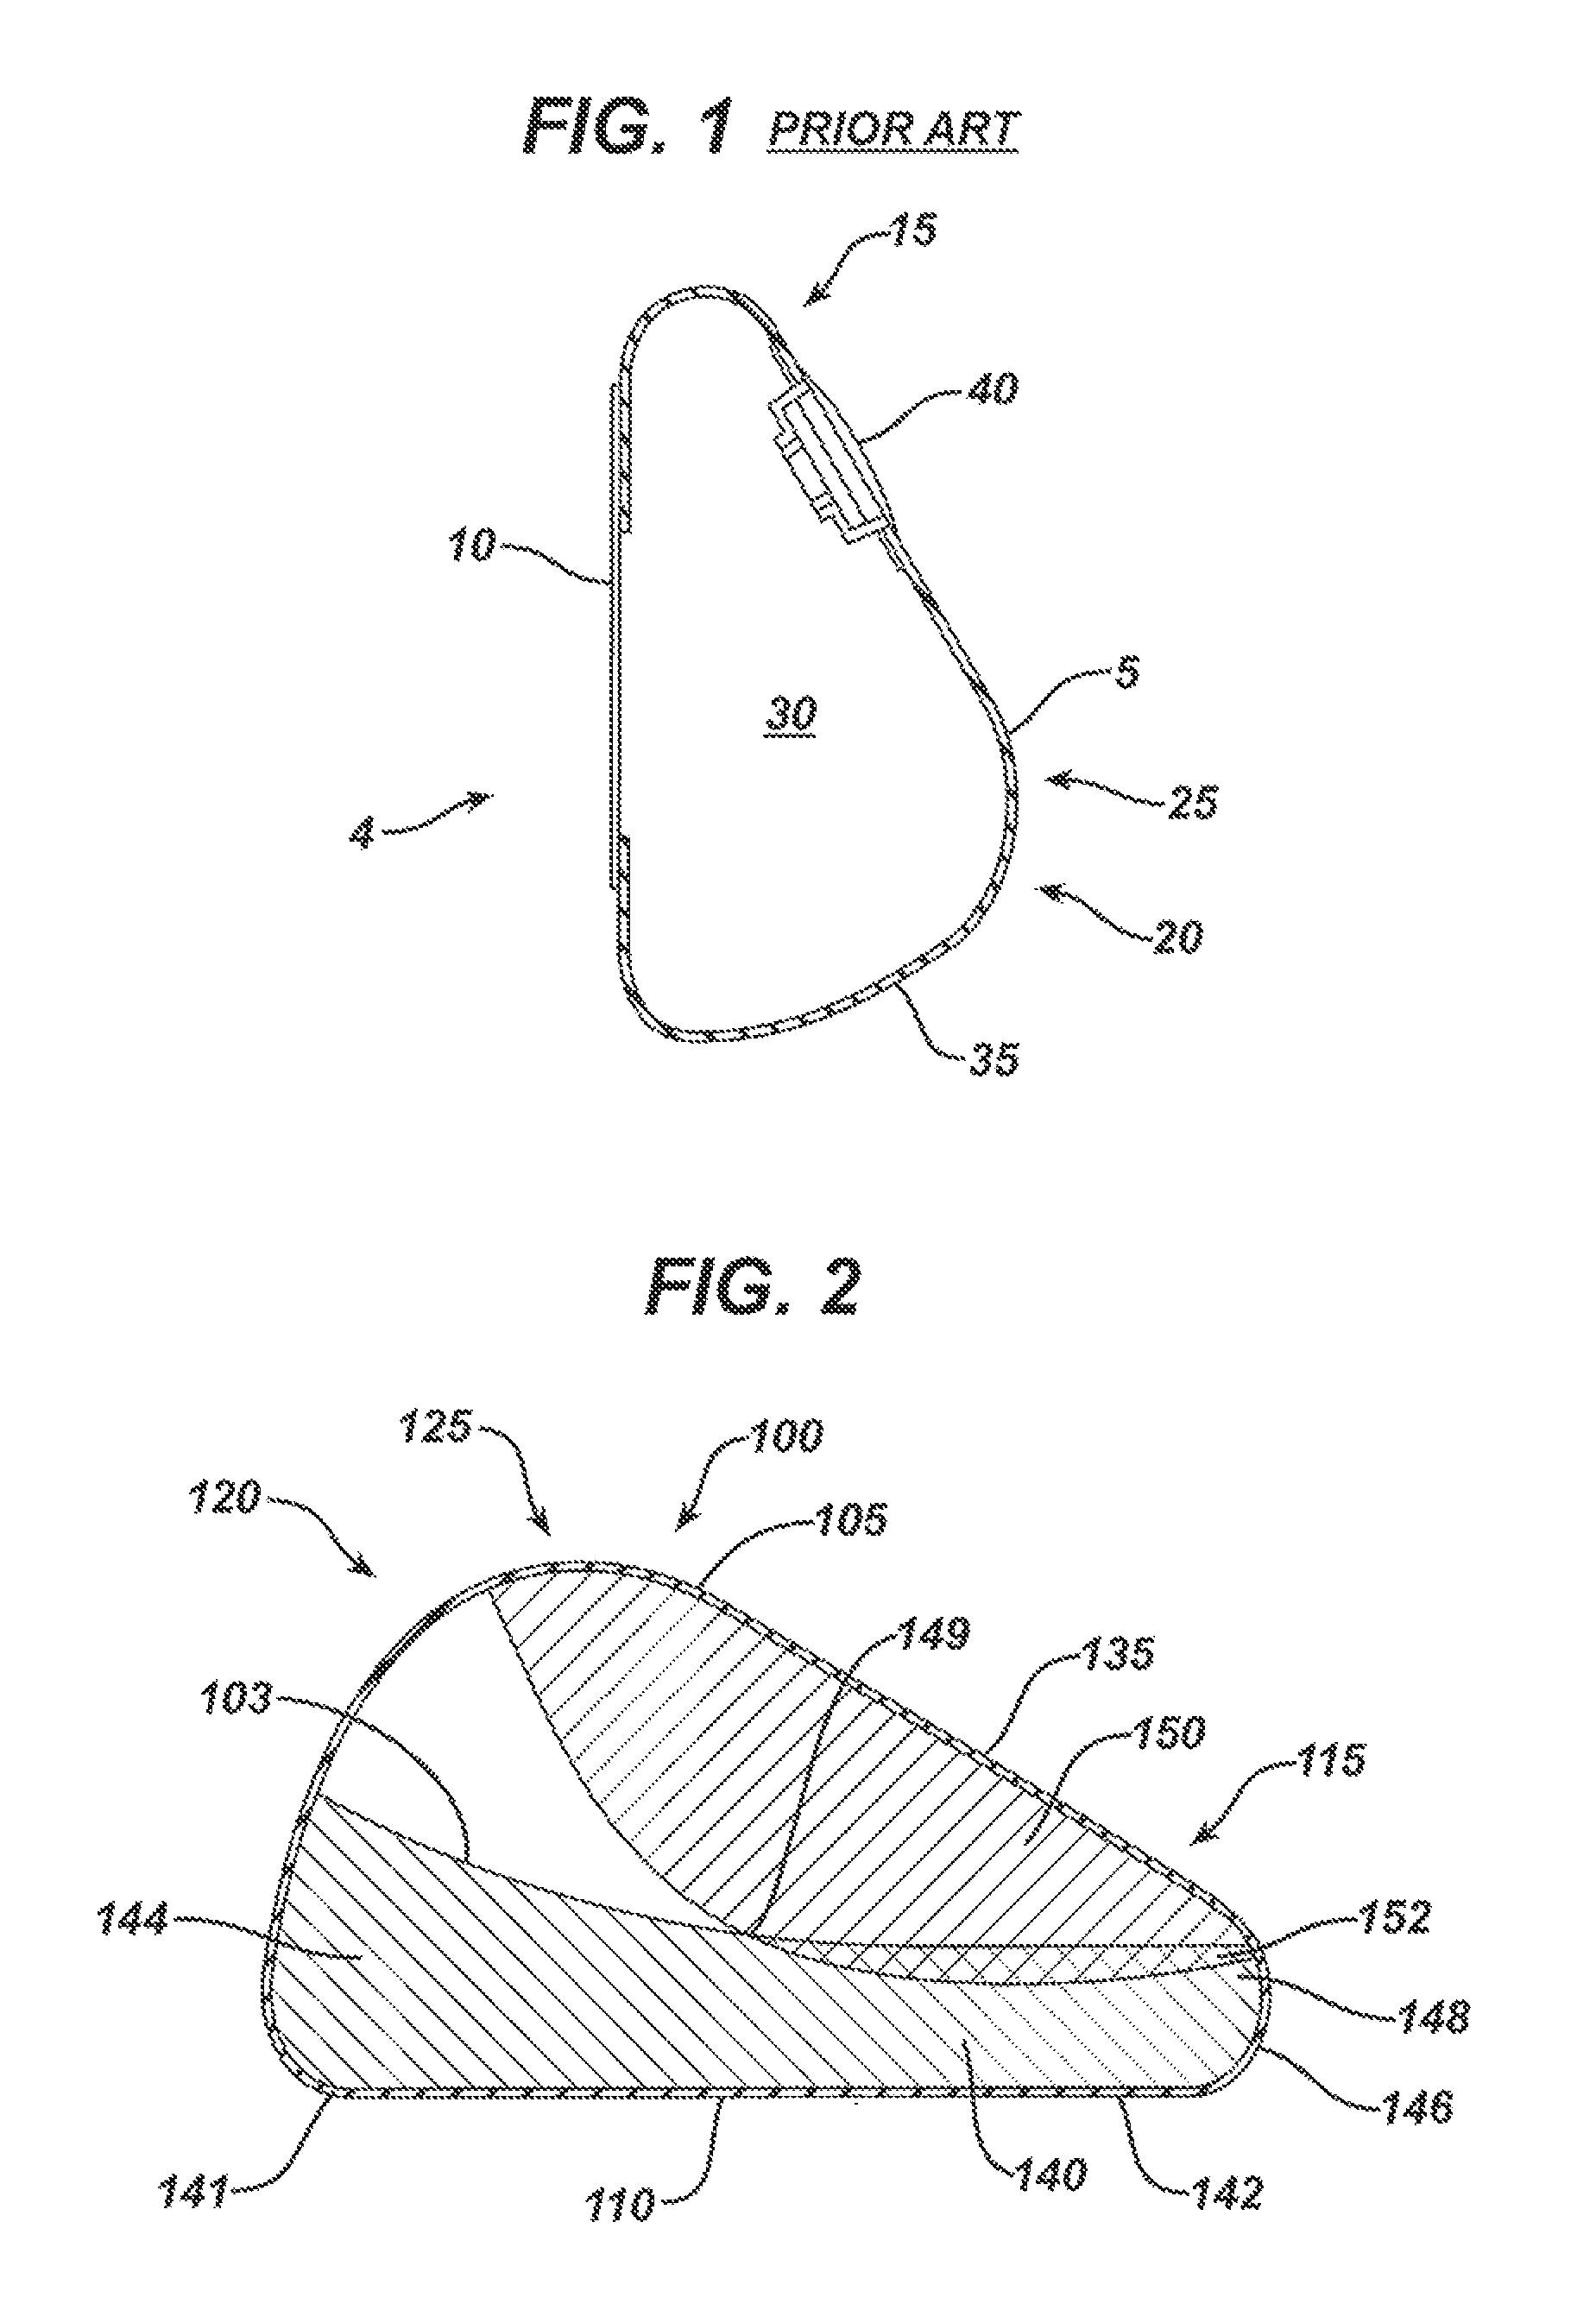 Directional tissue expander